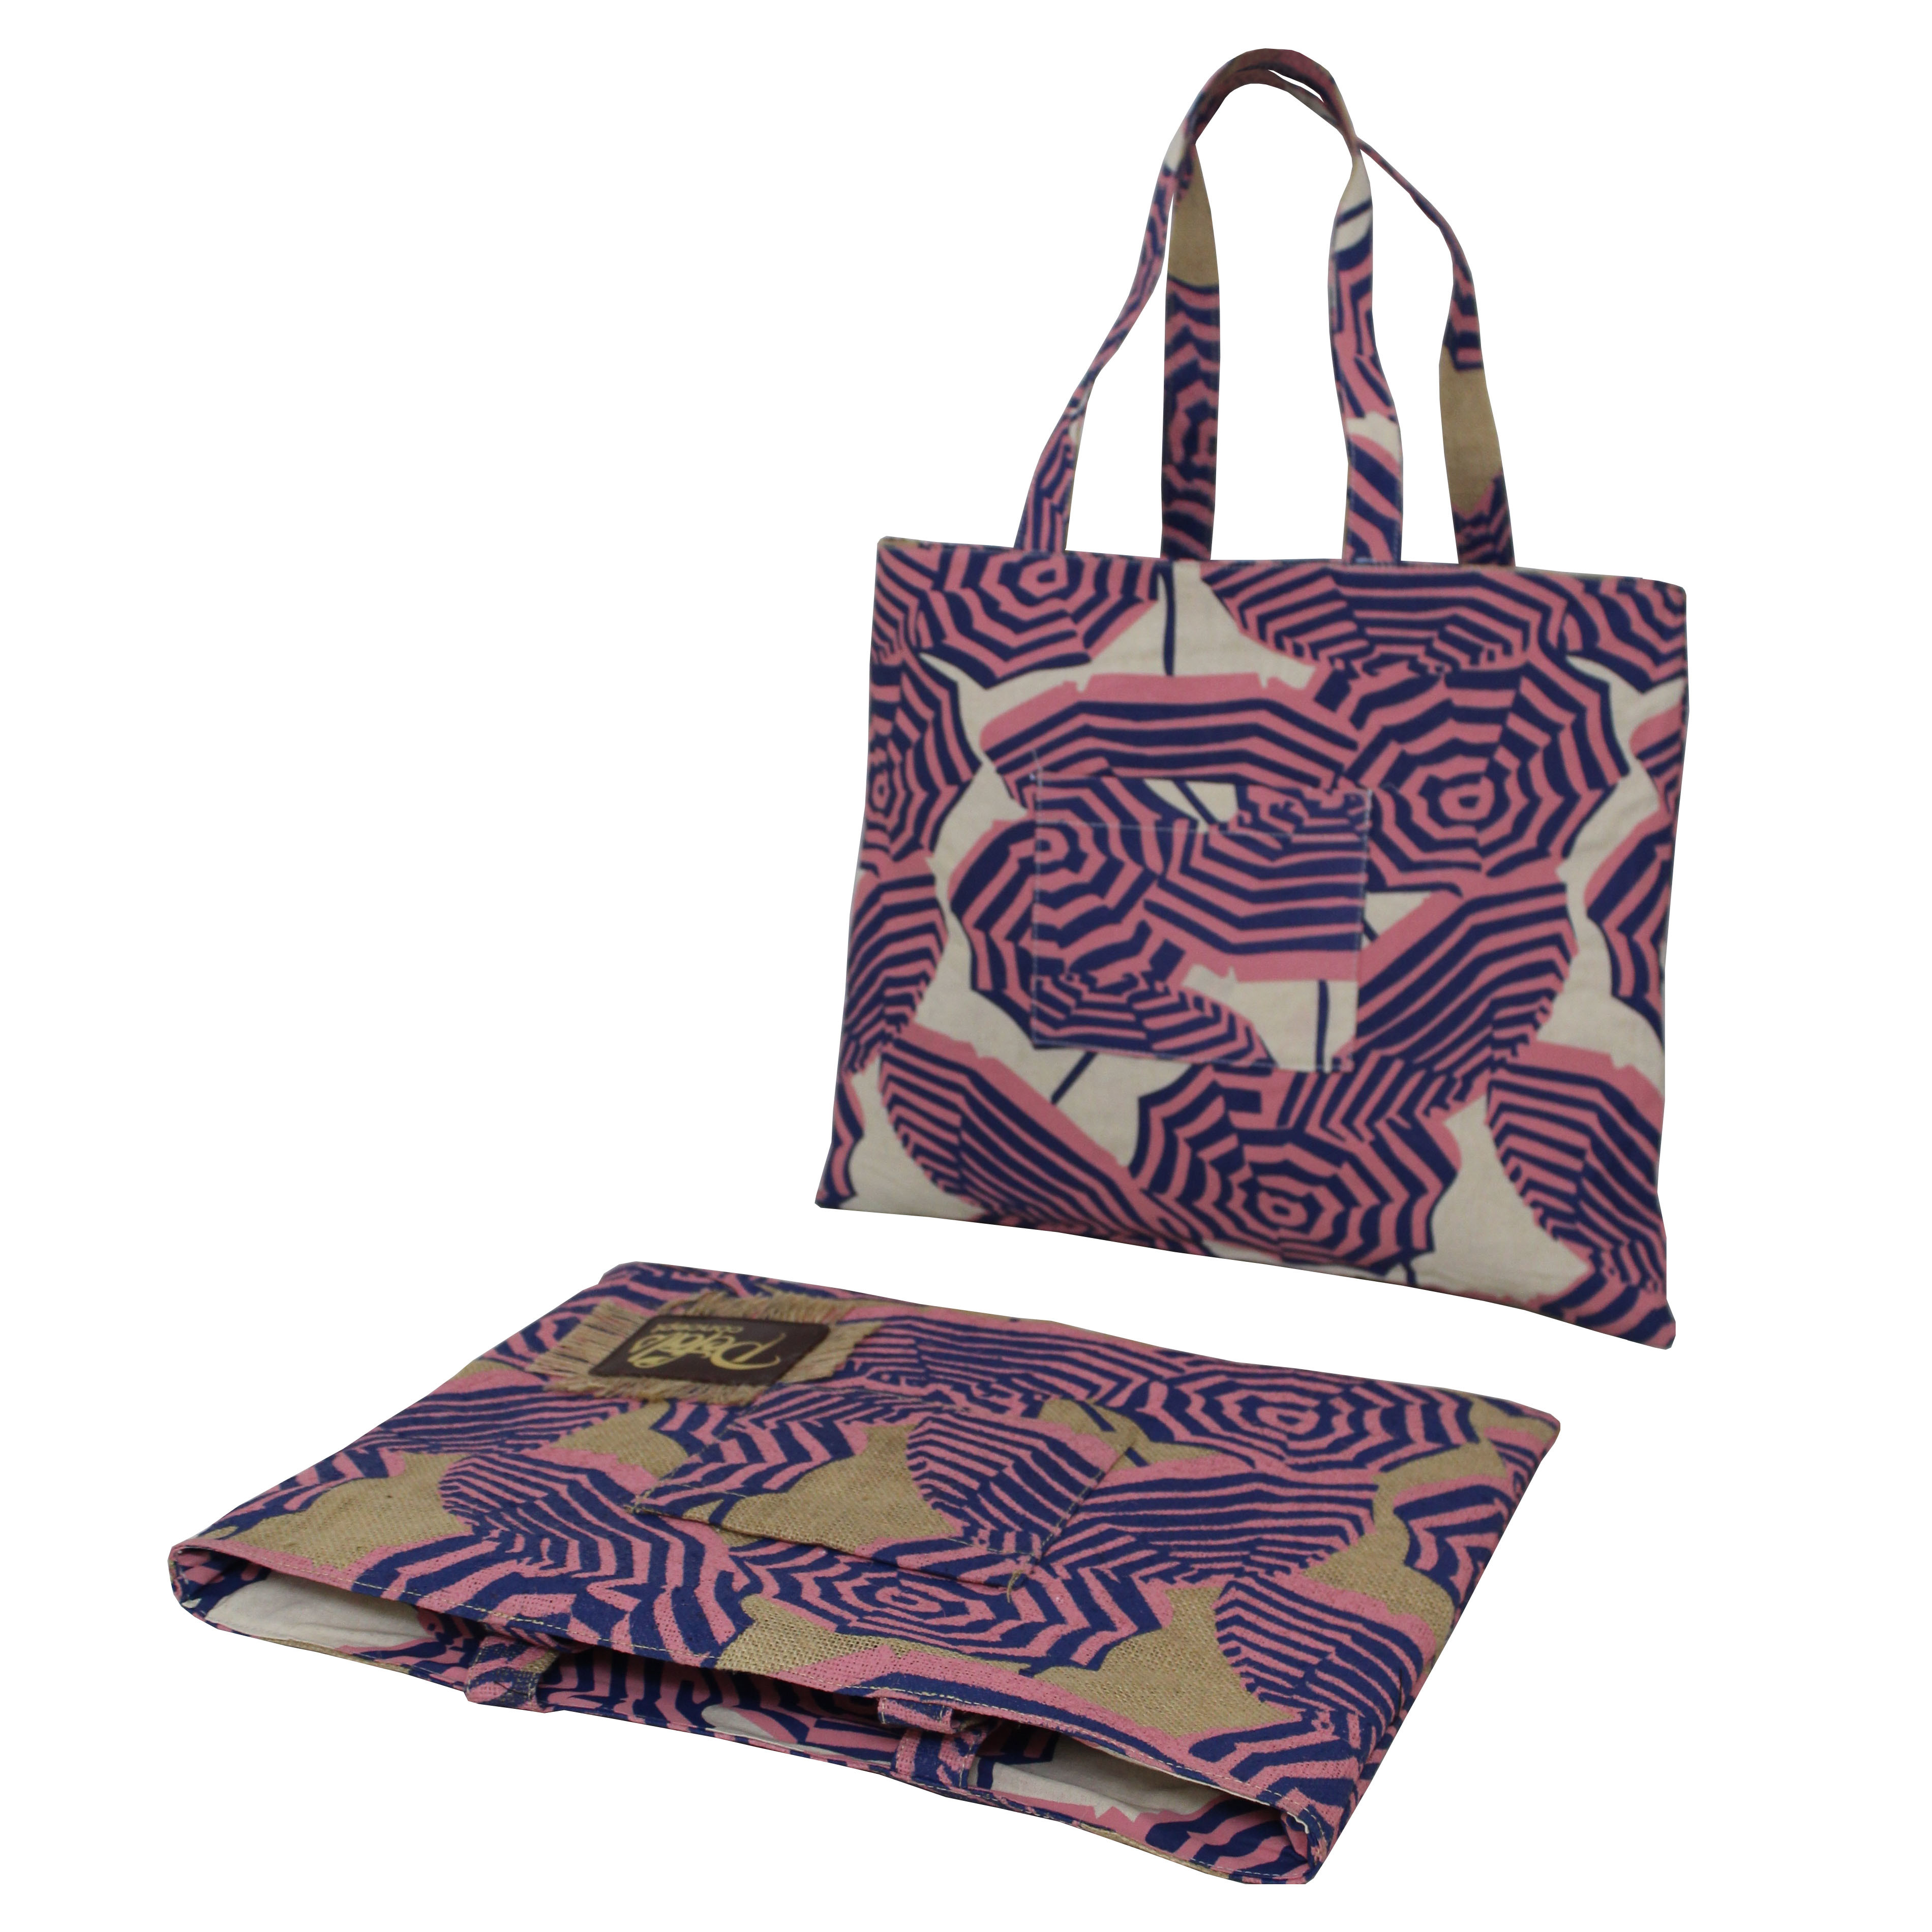 Two Color Print Jute And Cotton Reversible Tote Bag